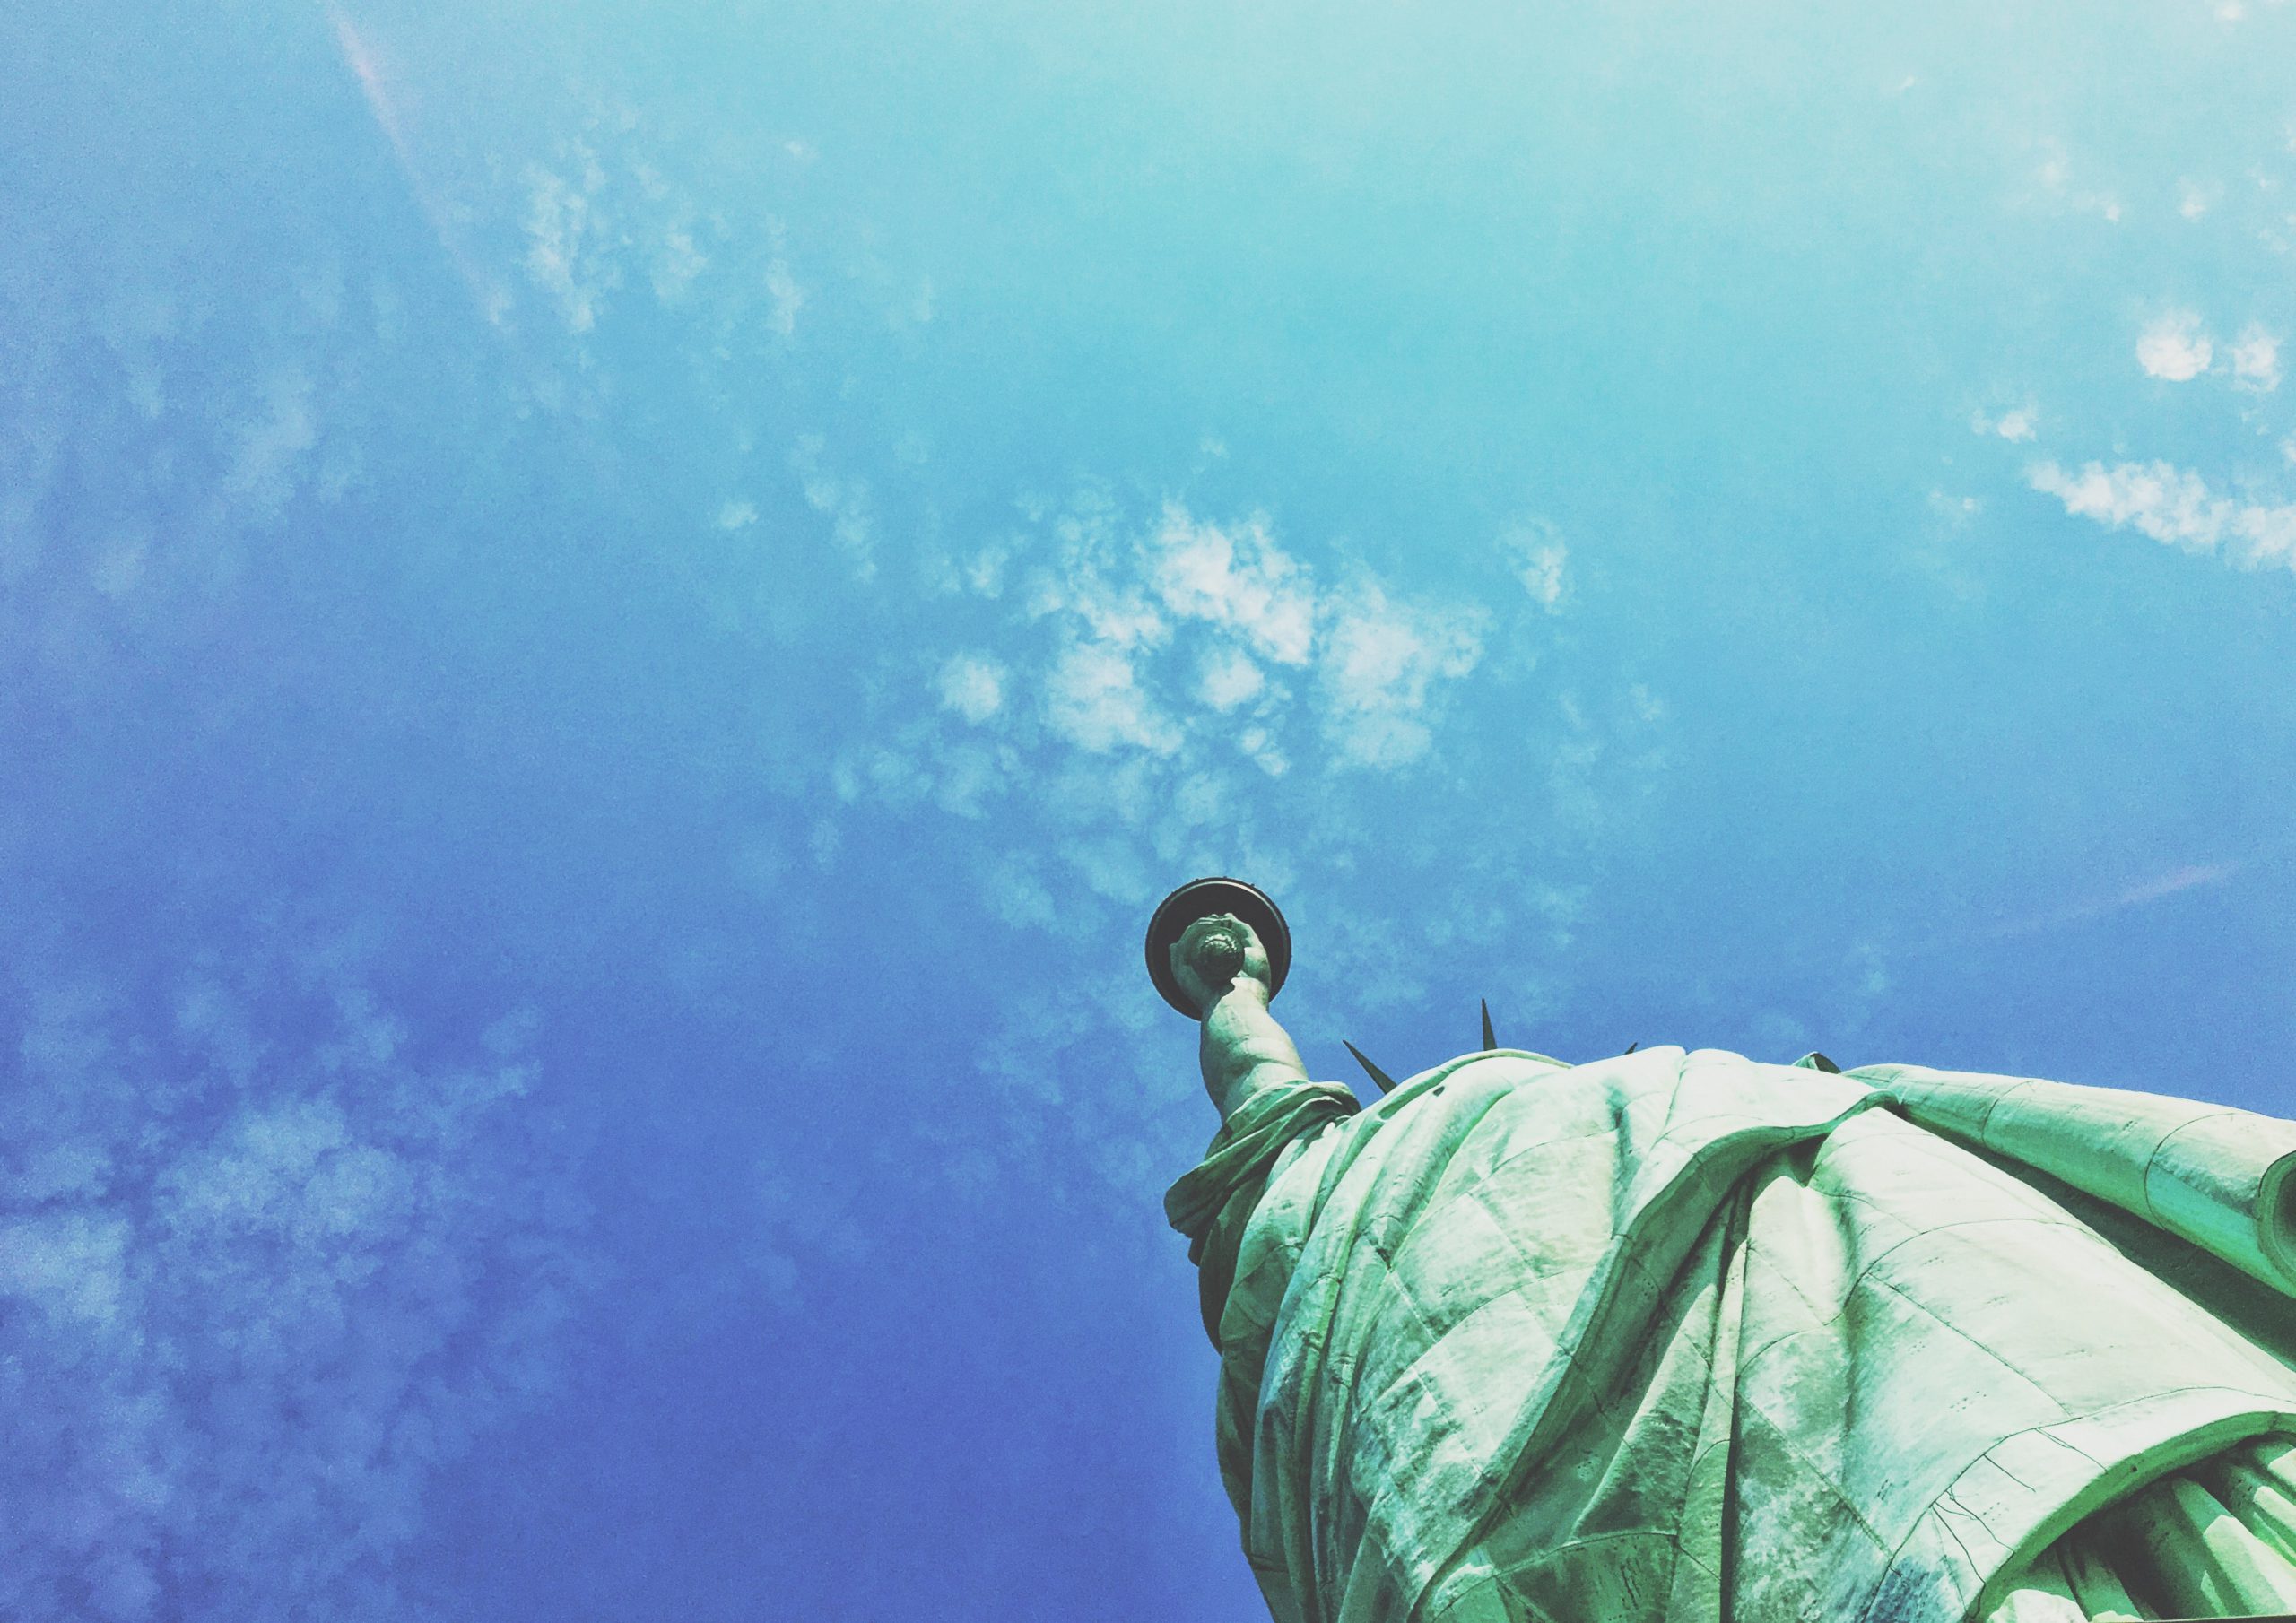 Shot from below - the statue of liberty against a blue sky.